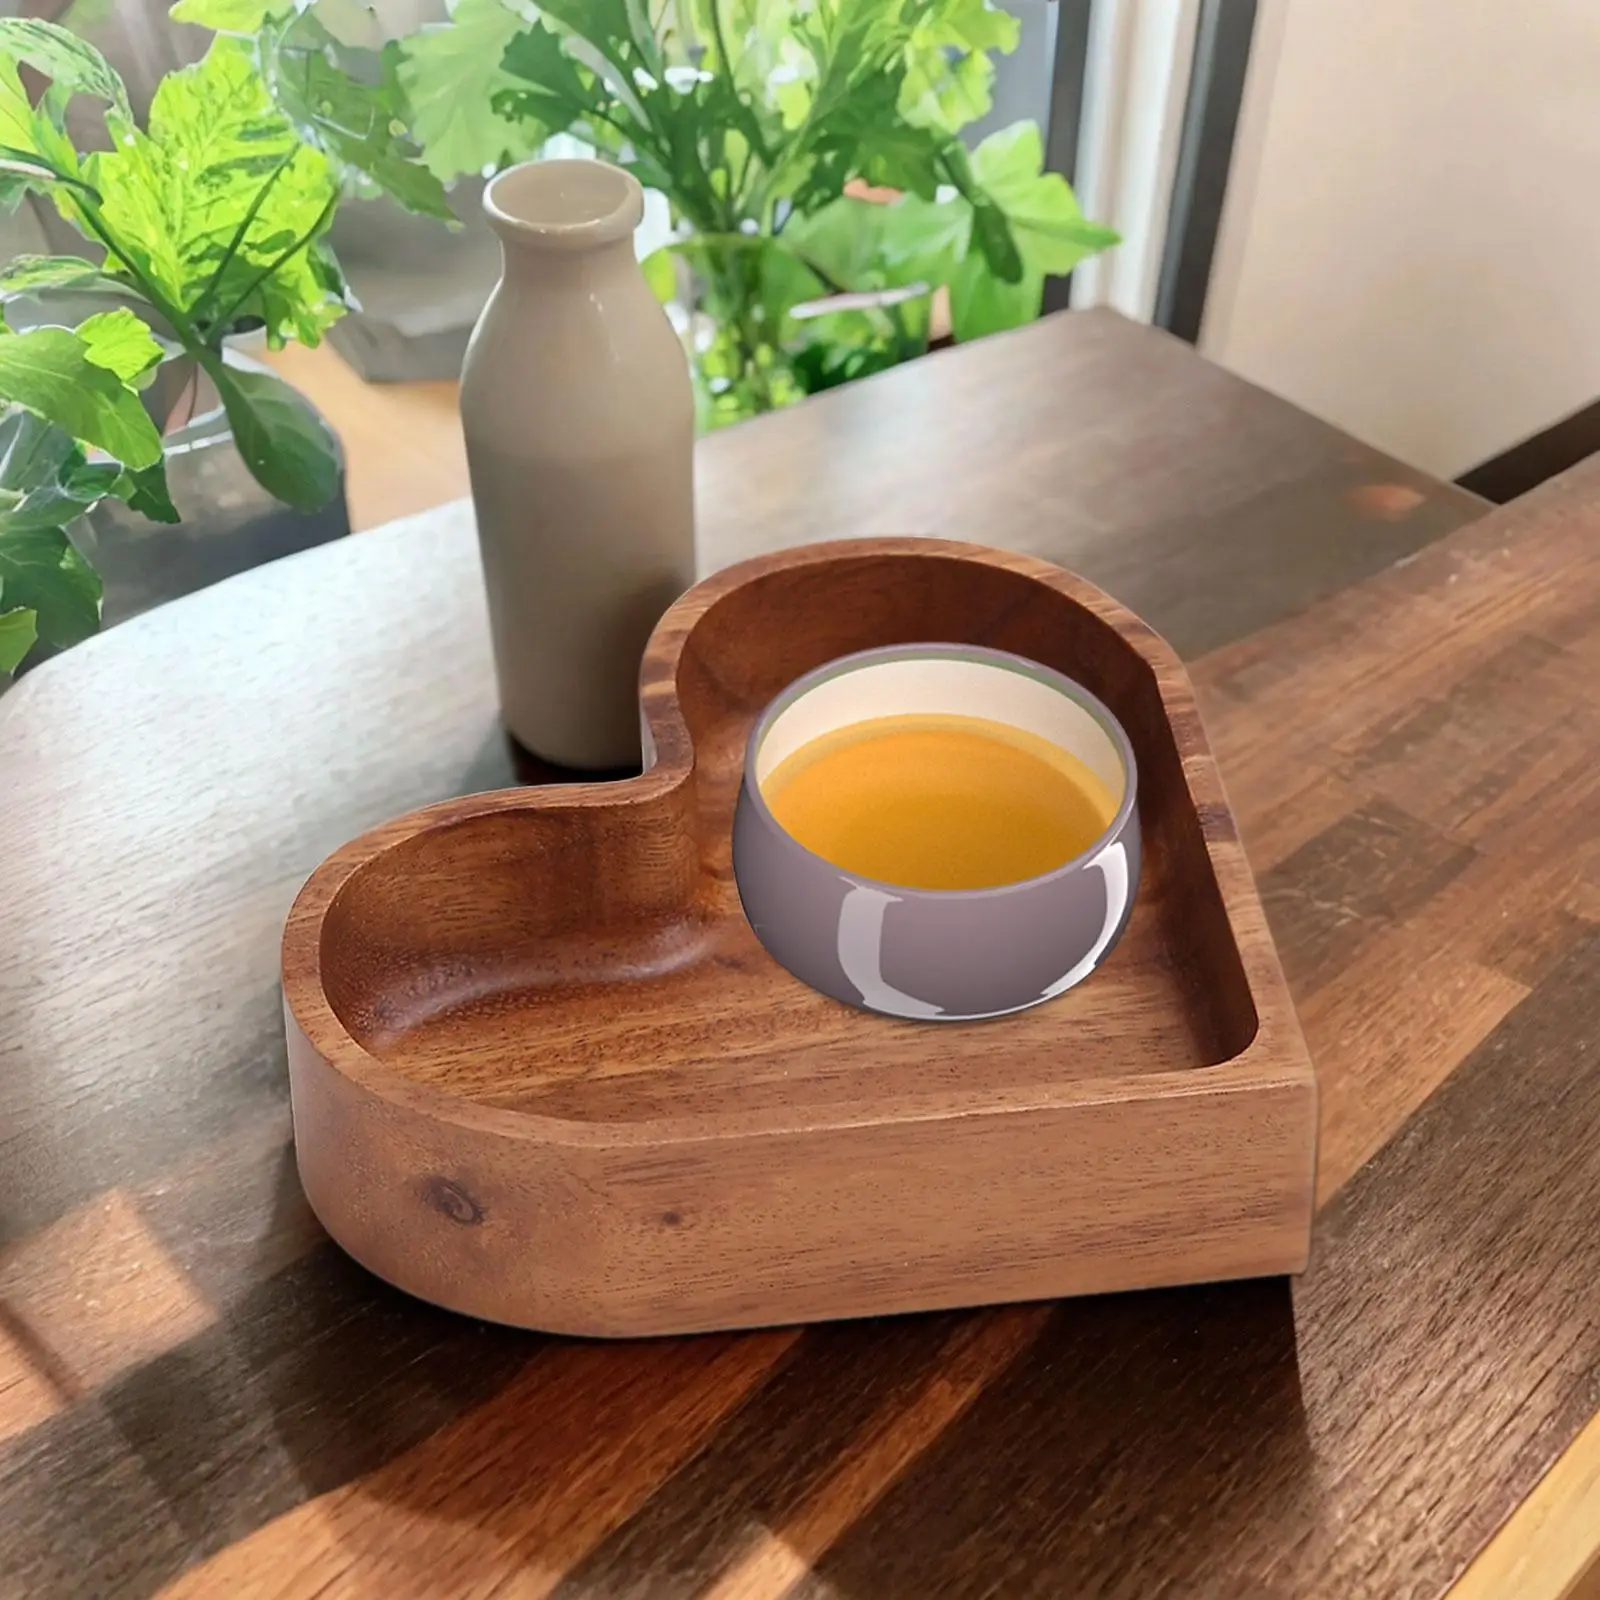 Wooden Serving Tray Versatile Farmhouse Decor for Bathroom, Outdoors Breakfast Tray Heart Shaped Plate Unique Heart Shaped Tray